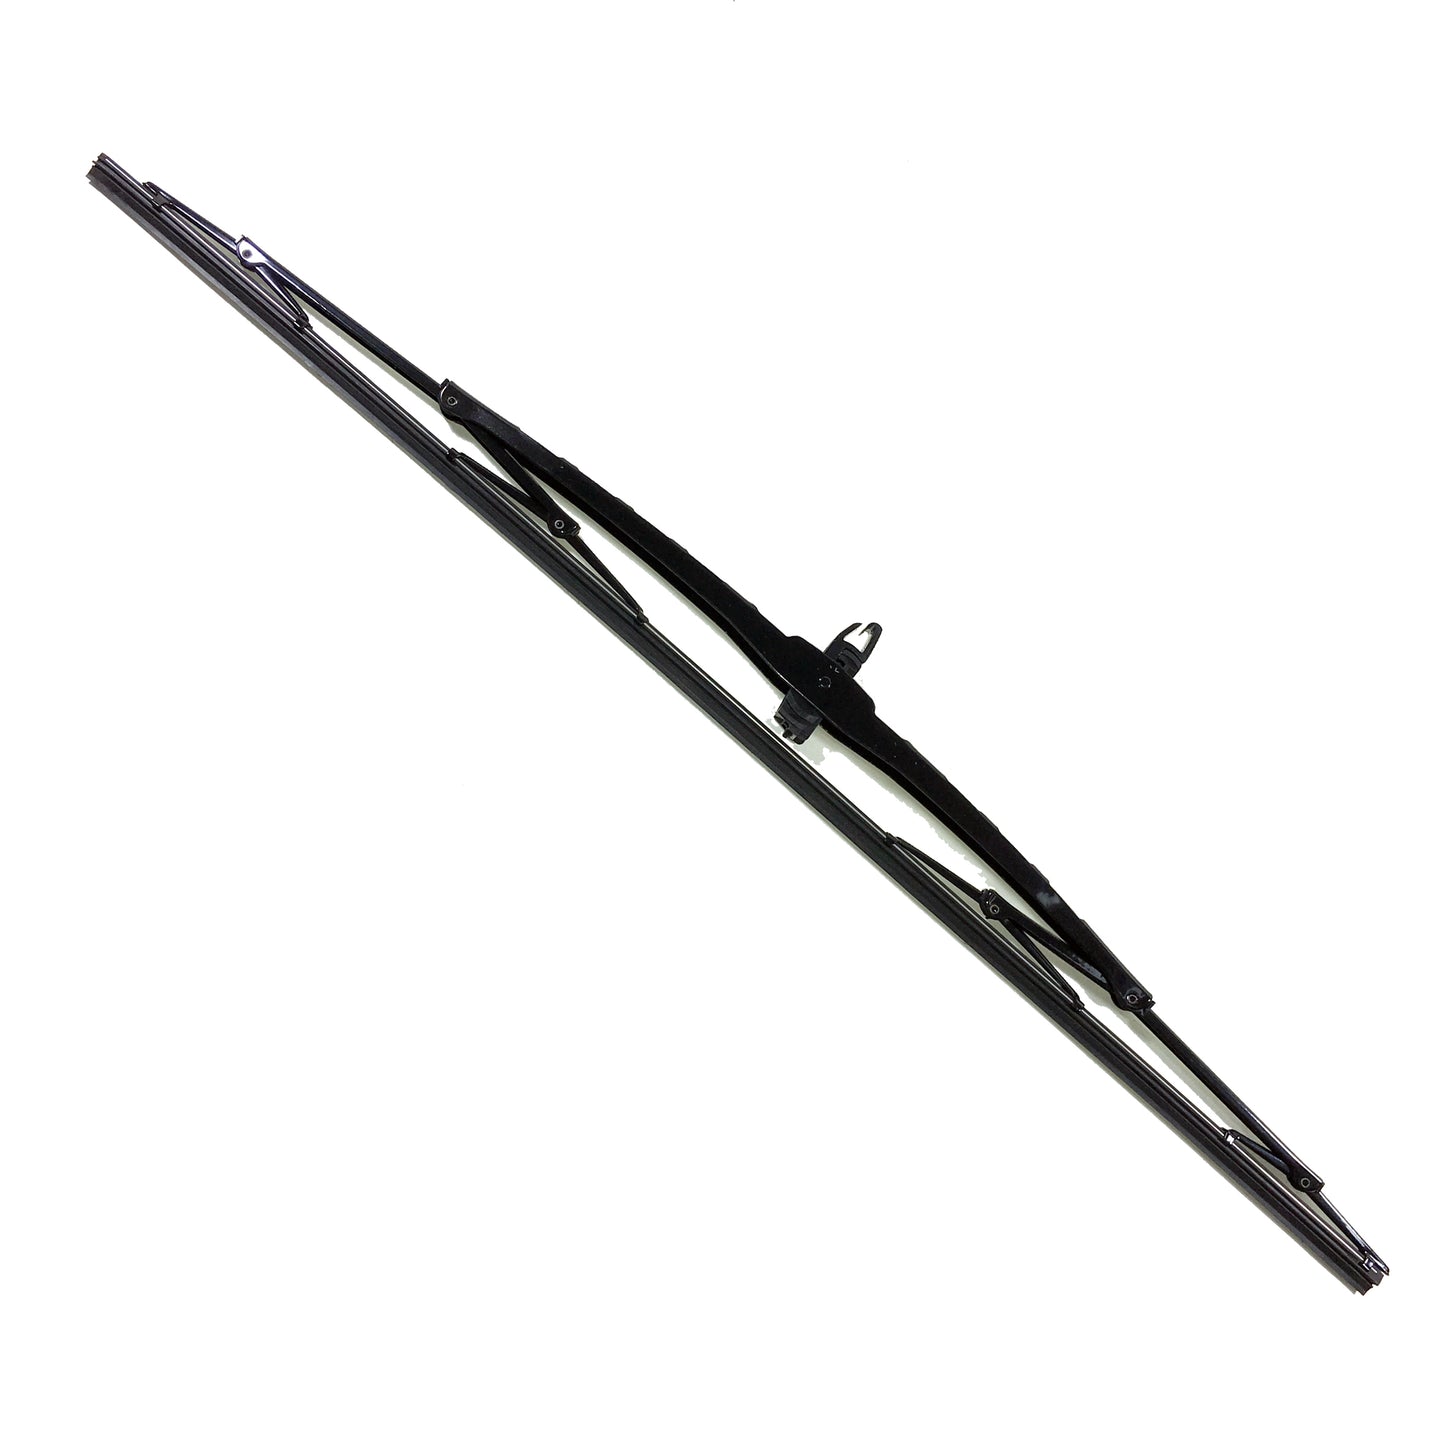 MERCEDES-BENZ COUPE Coupe Mar 1987 to May 1993 Wiper Blade Kit